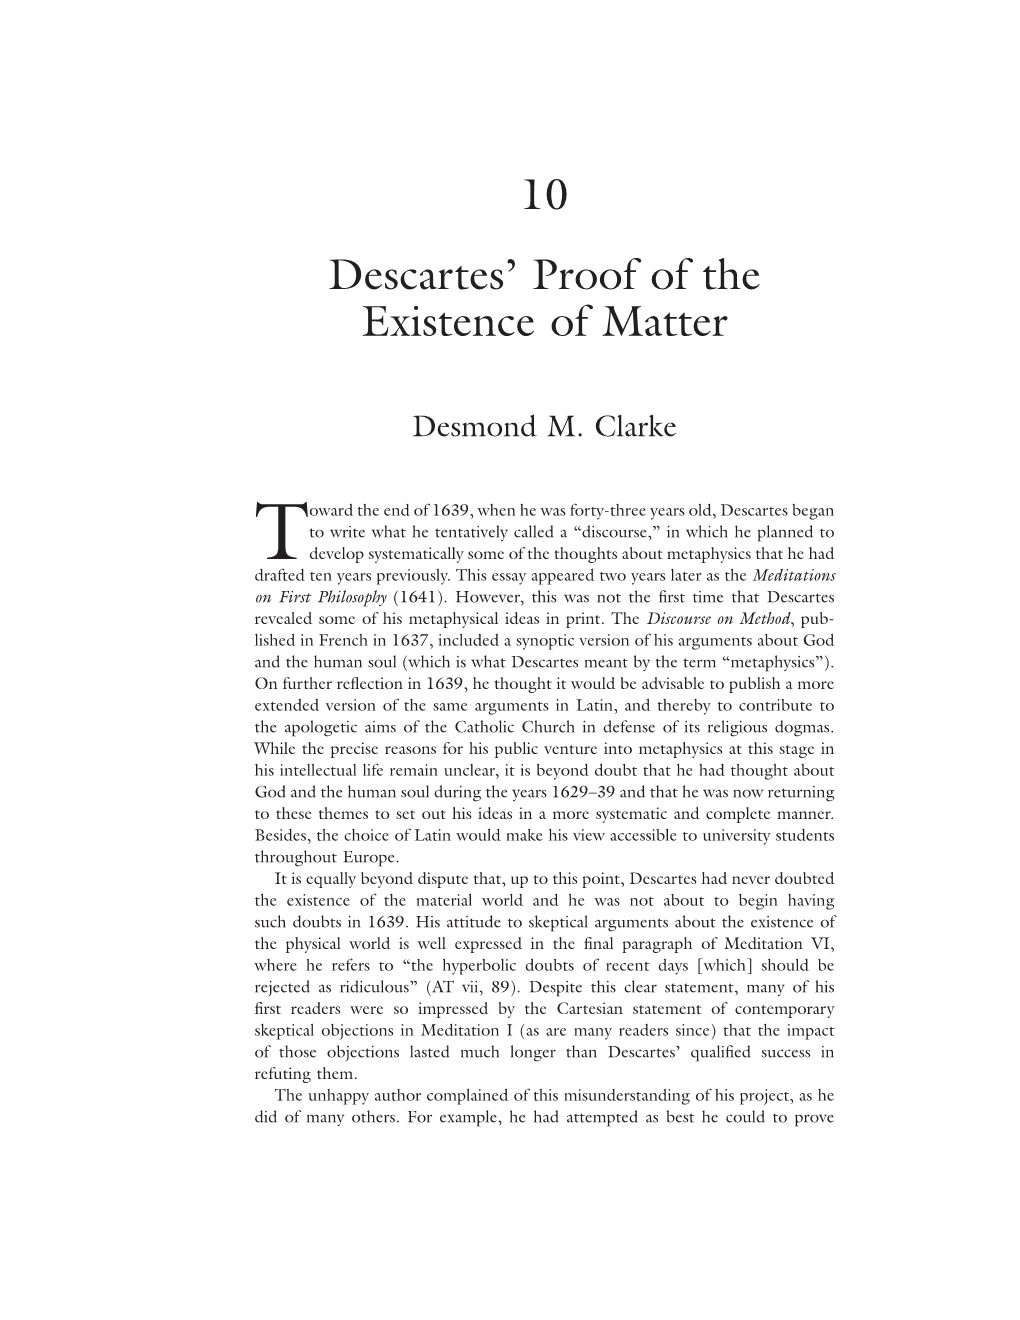 Descartes' Proof of the Existence of Matter